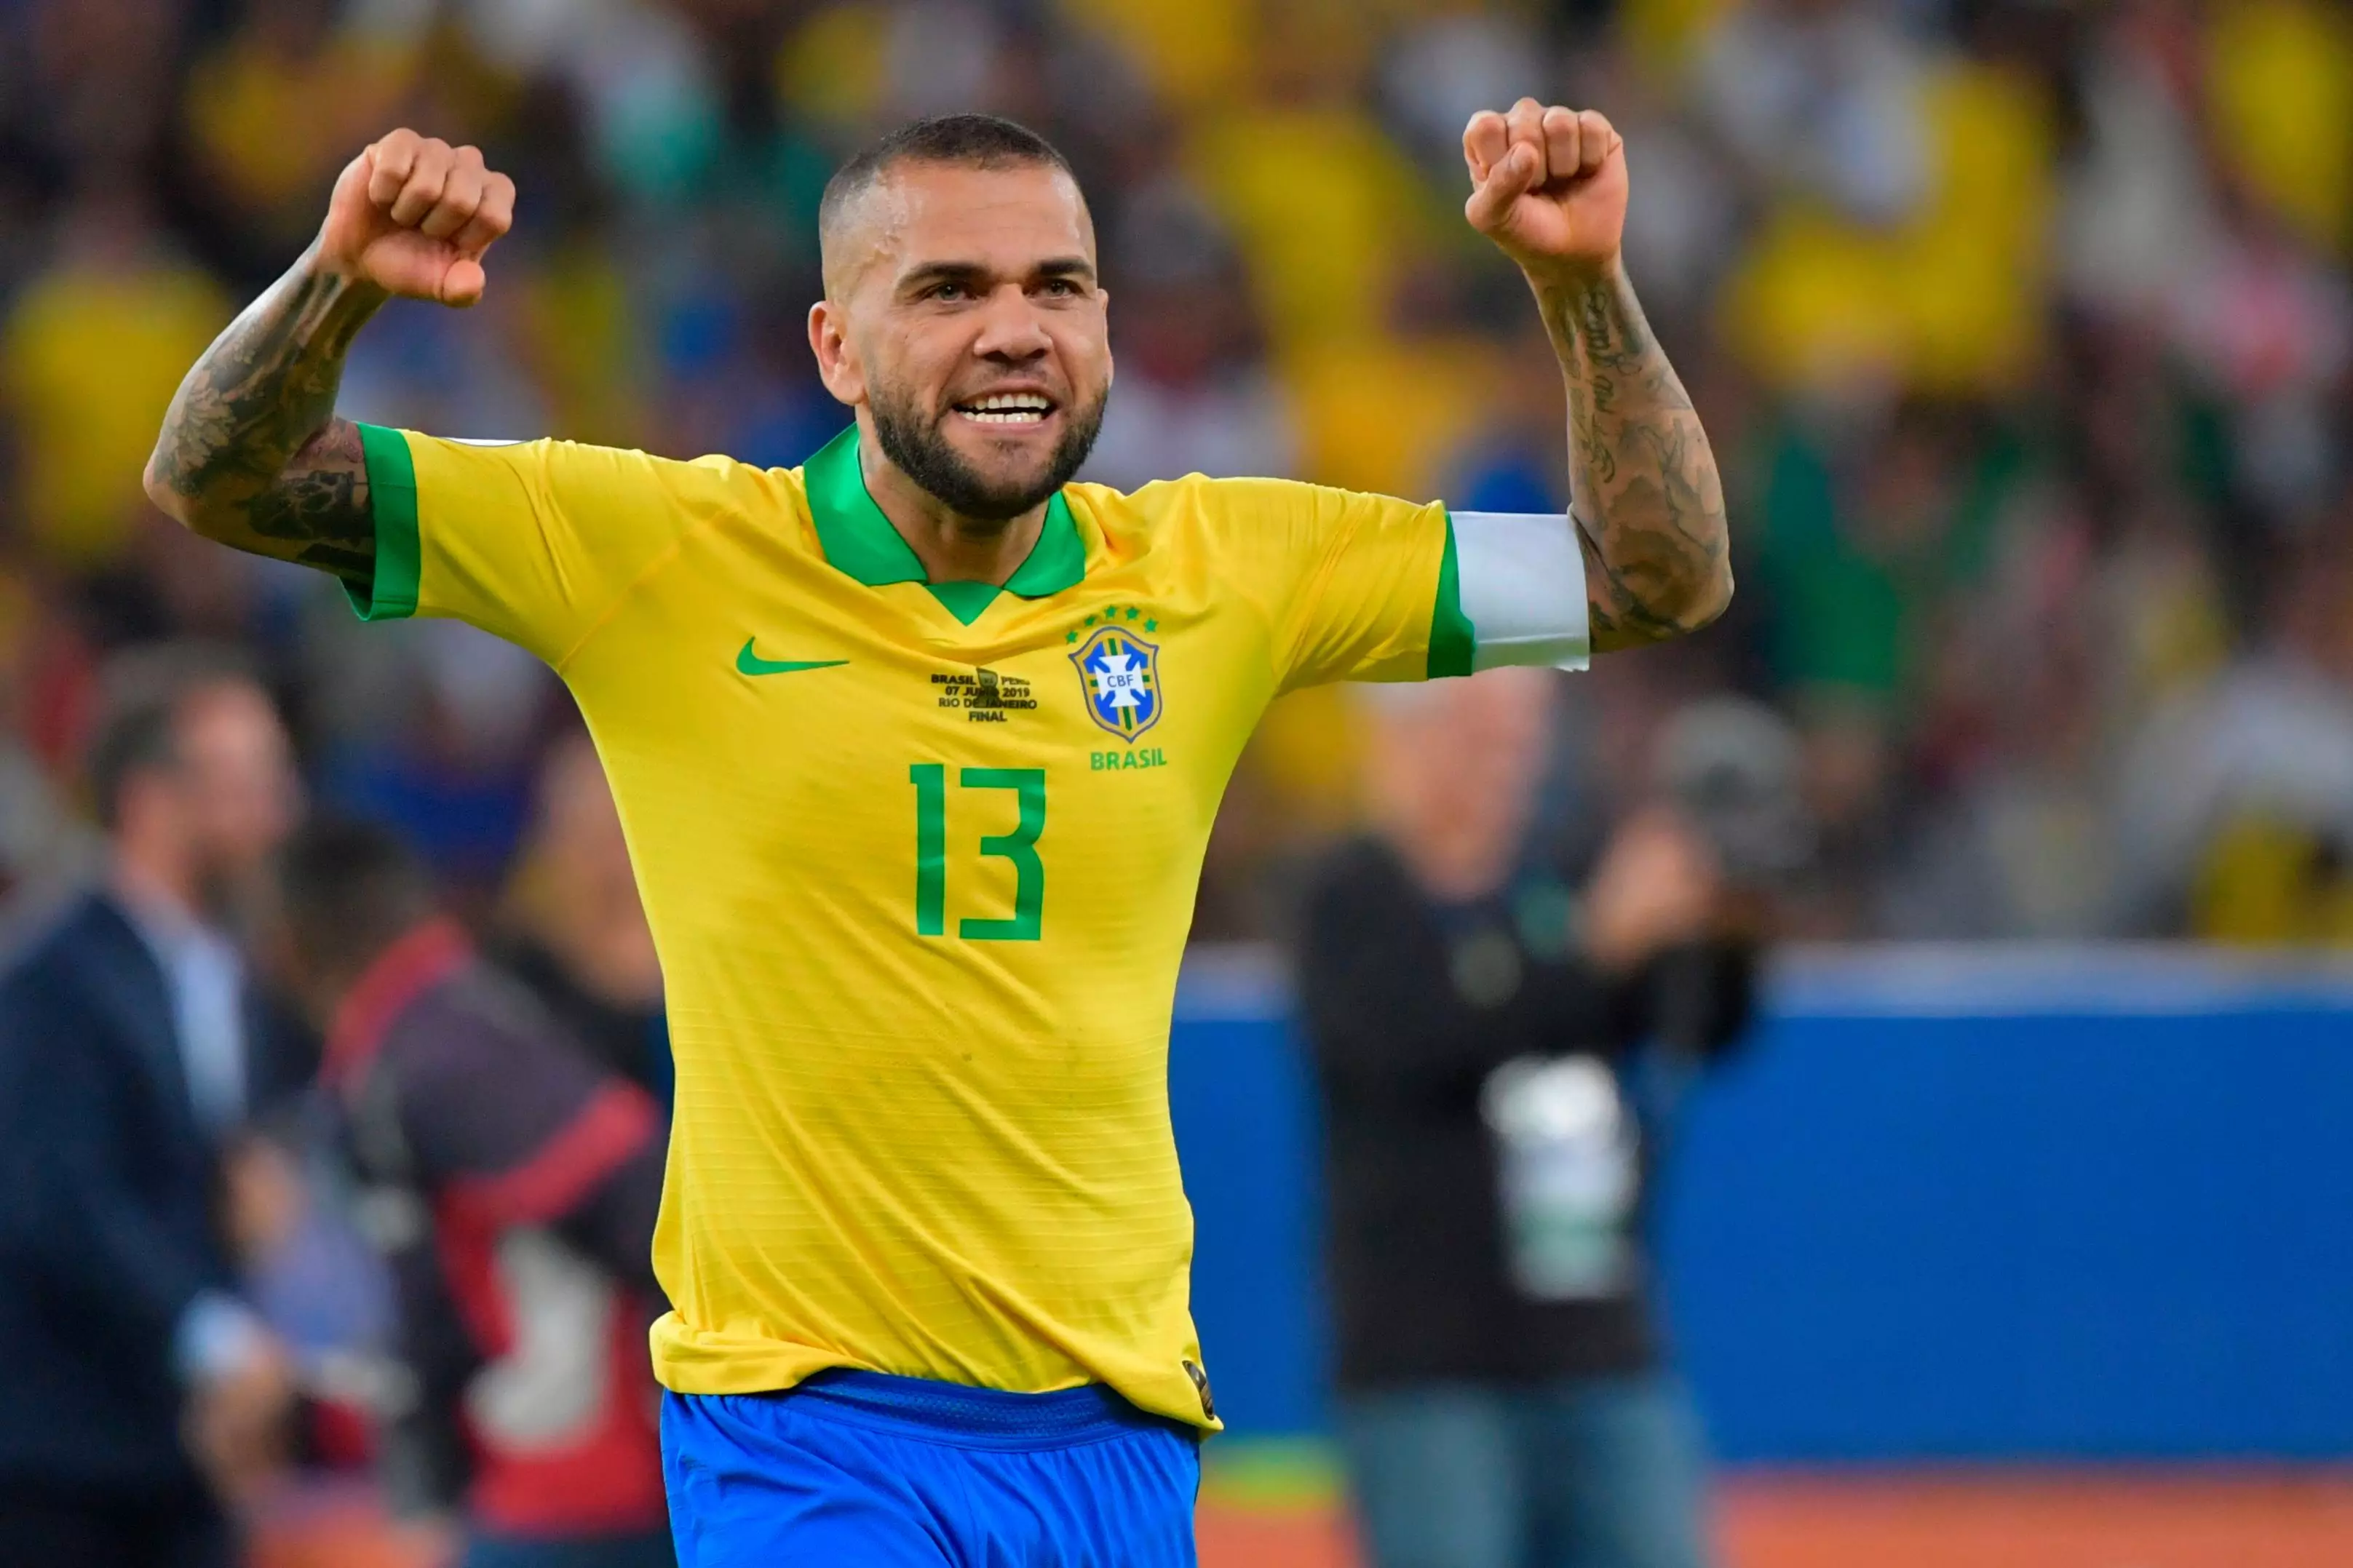 Dani Alves is now 38-years-old and has a won a host of honours in a glittering career